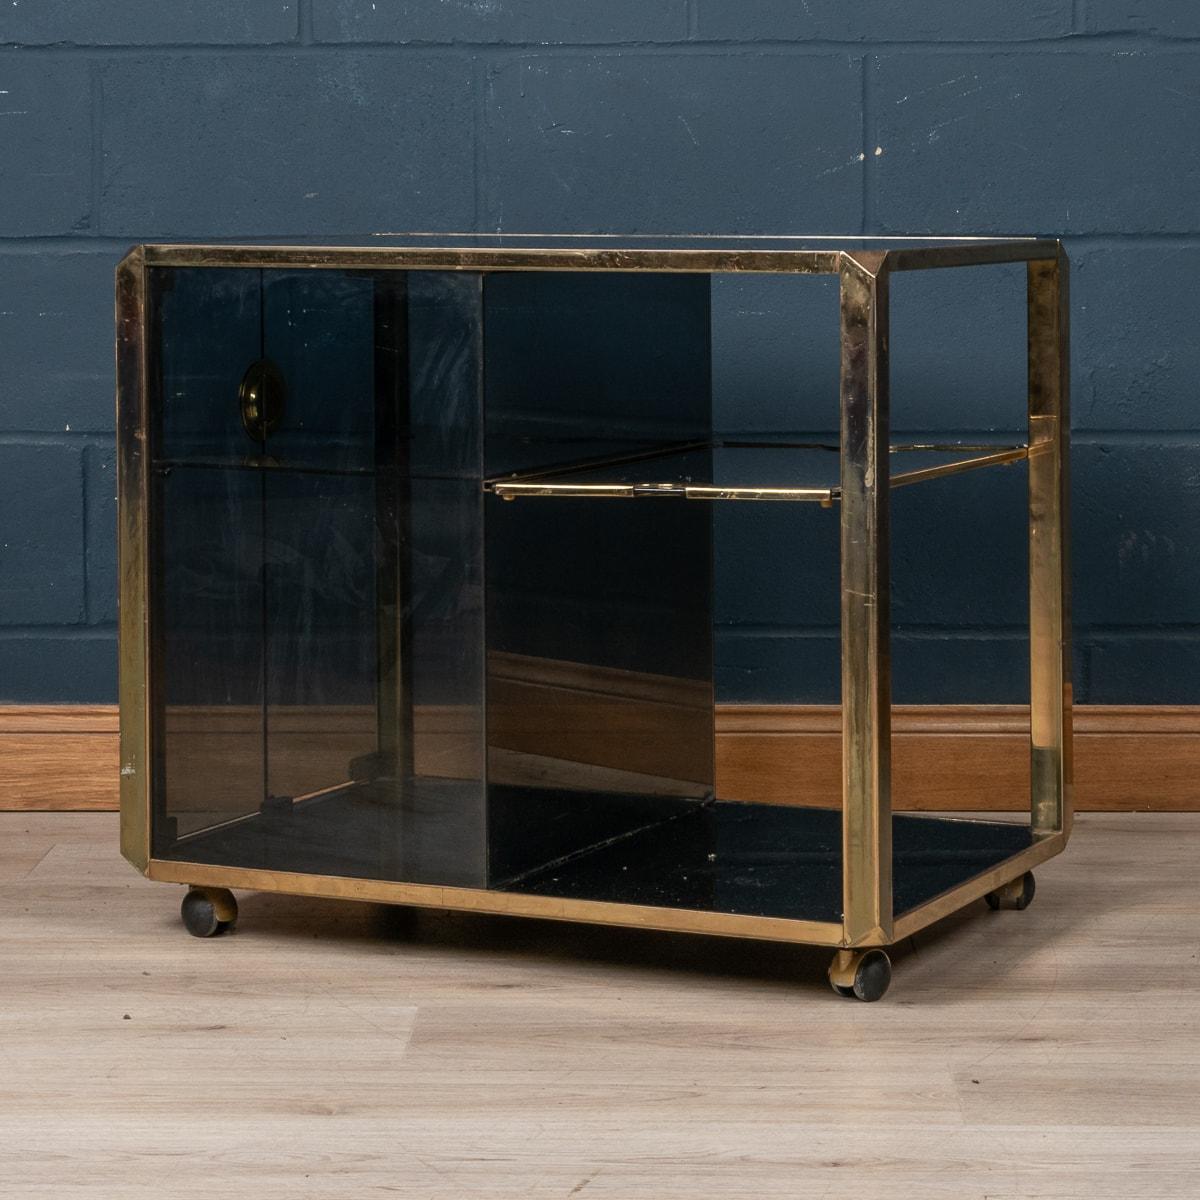 An elegant brass framed cocktail trolley designed by Willy Rizzo for Mario Sabot, produced in Italy in the 1970s. The dark smoked glass panels are framed by a brass structure on castors, one half with open shelves with a pull-out tray, the other